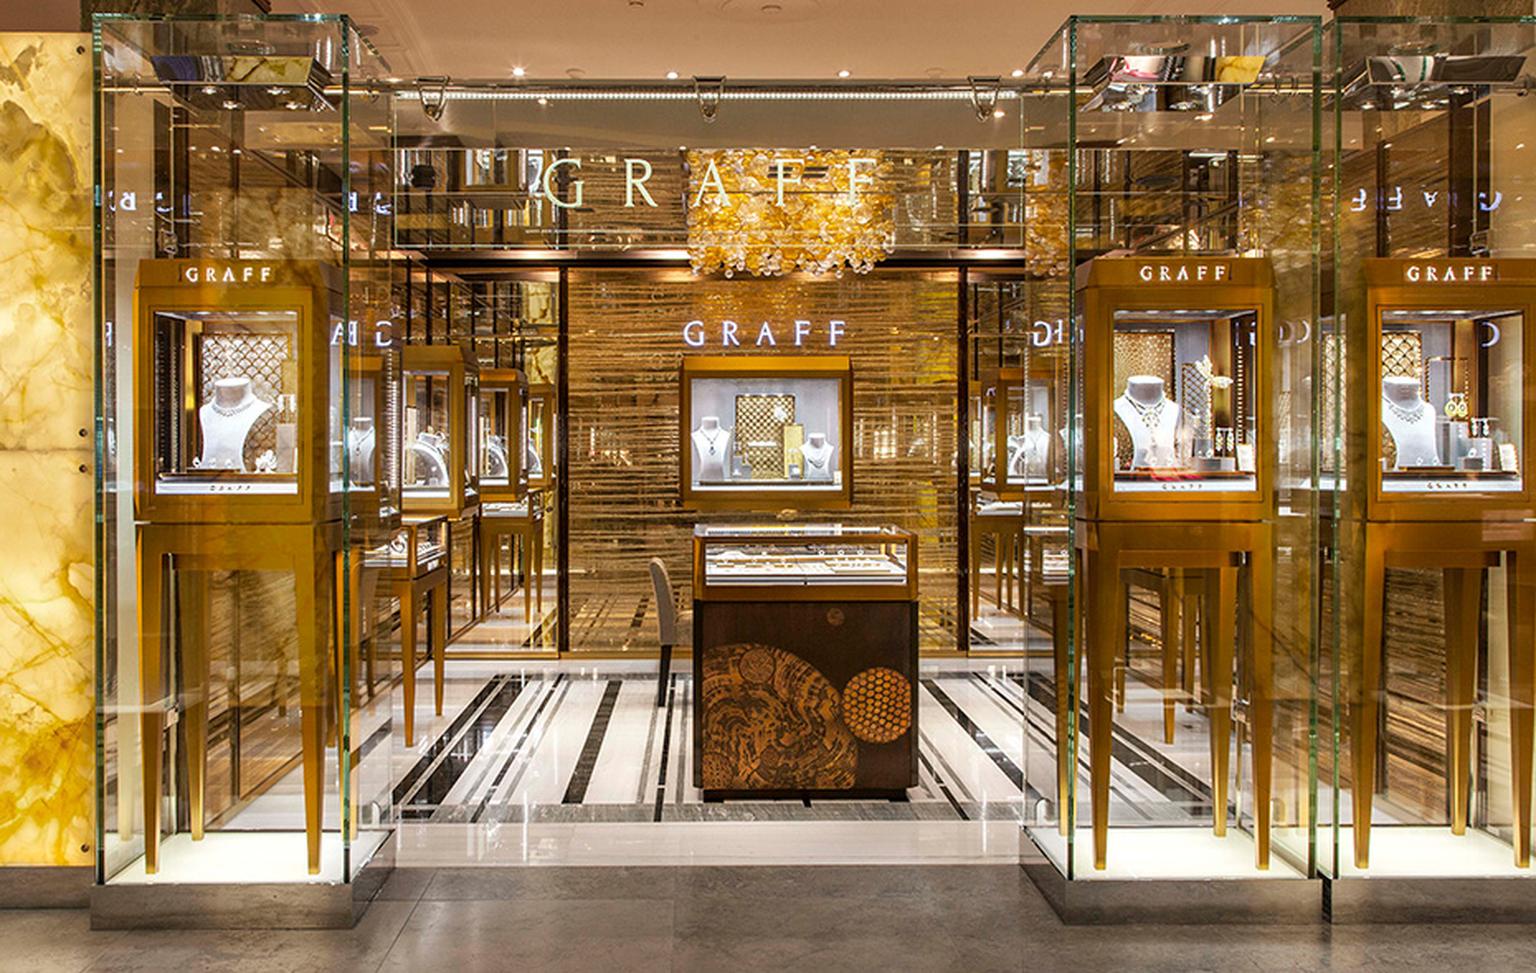 Graff is the sixth and final brand to open a dedicated space in Harrod's newly extended Fine Jewellery Room.